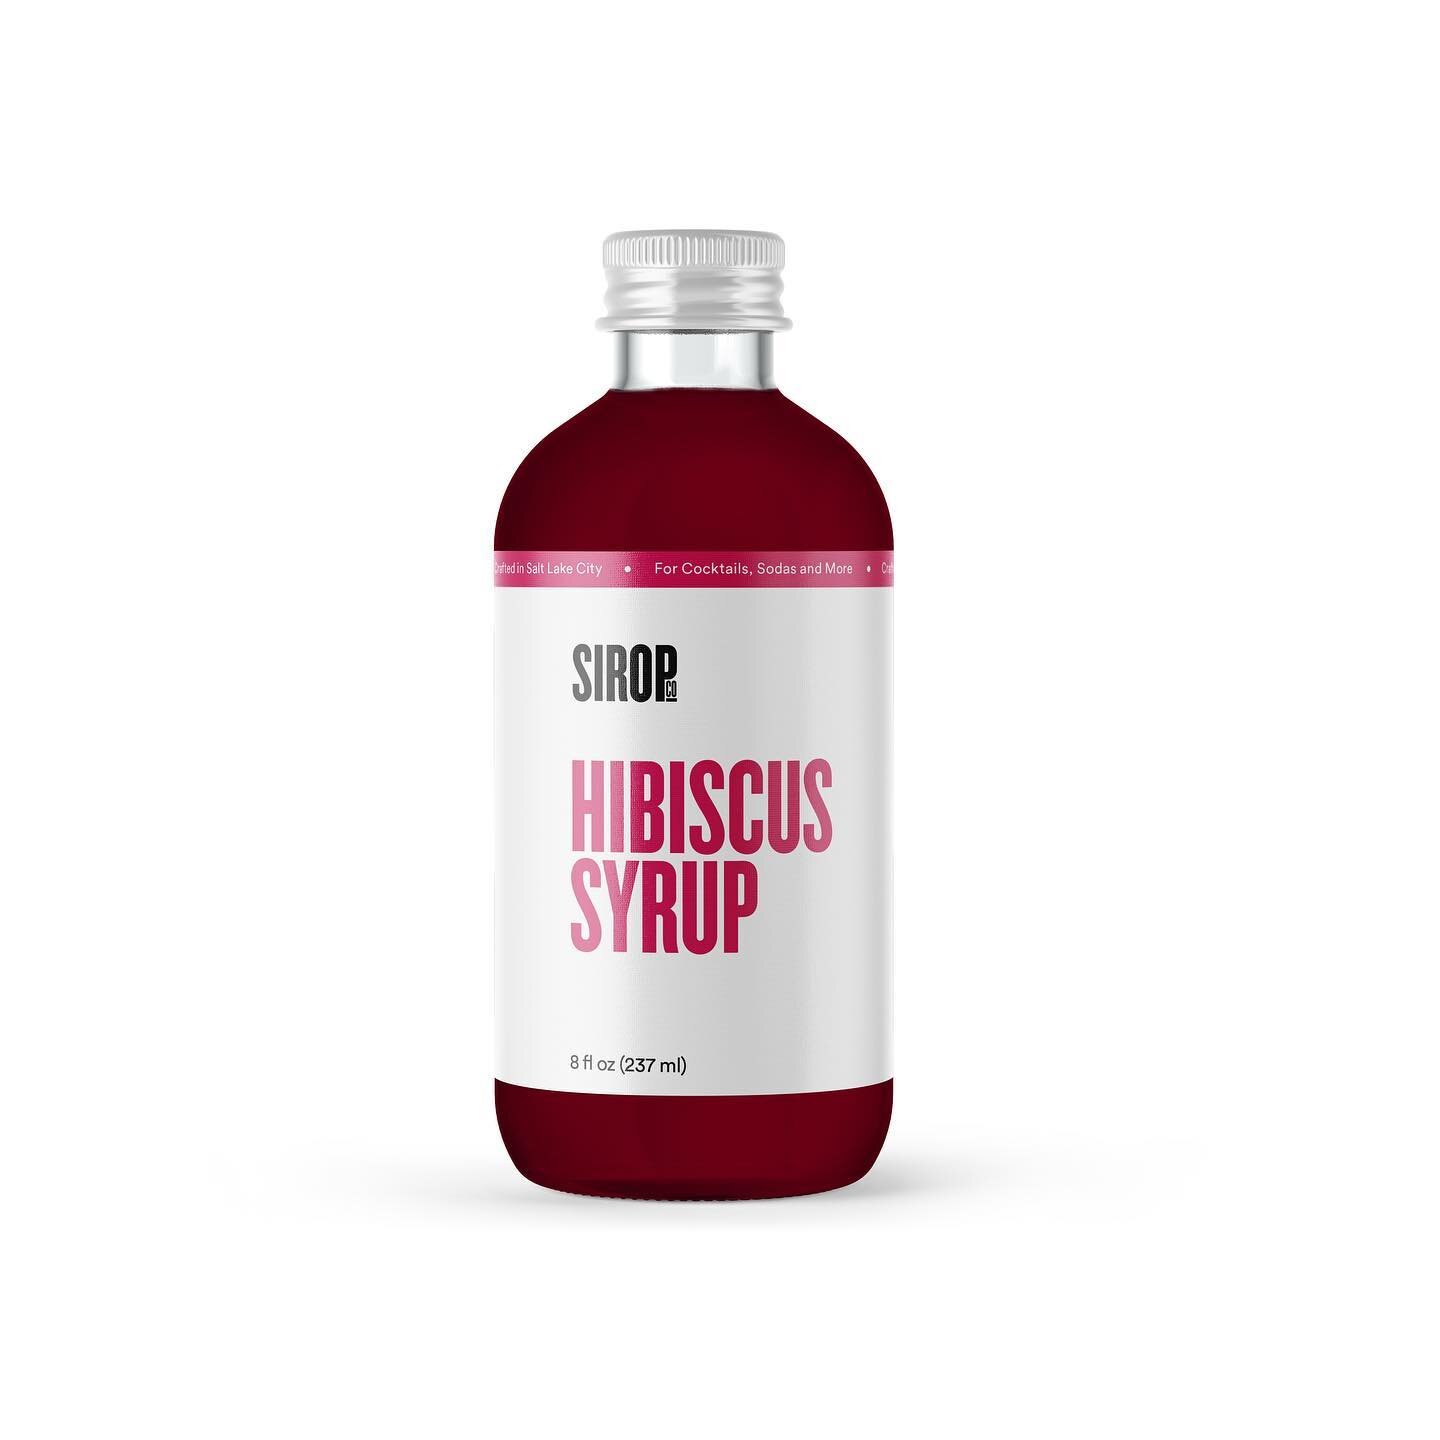 Warm weather is here and that means it&rsquo;s a fantasy time to try out Hibiscus syrup.

#Cocktailsofinstagram #happyhourathome #drinksathome #homebartending #cocktails #craftcocktails #homebar #homebartender #happyhour #imbibegram #imbibe #cocktail